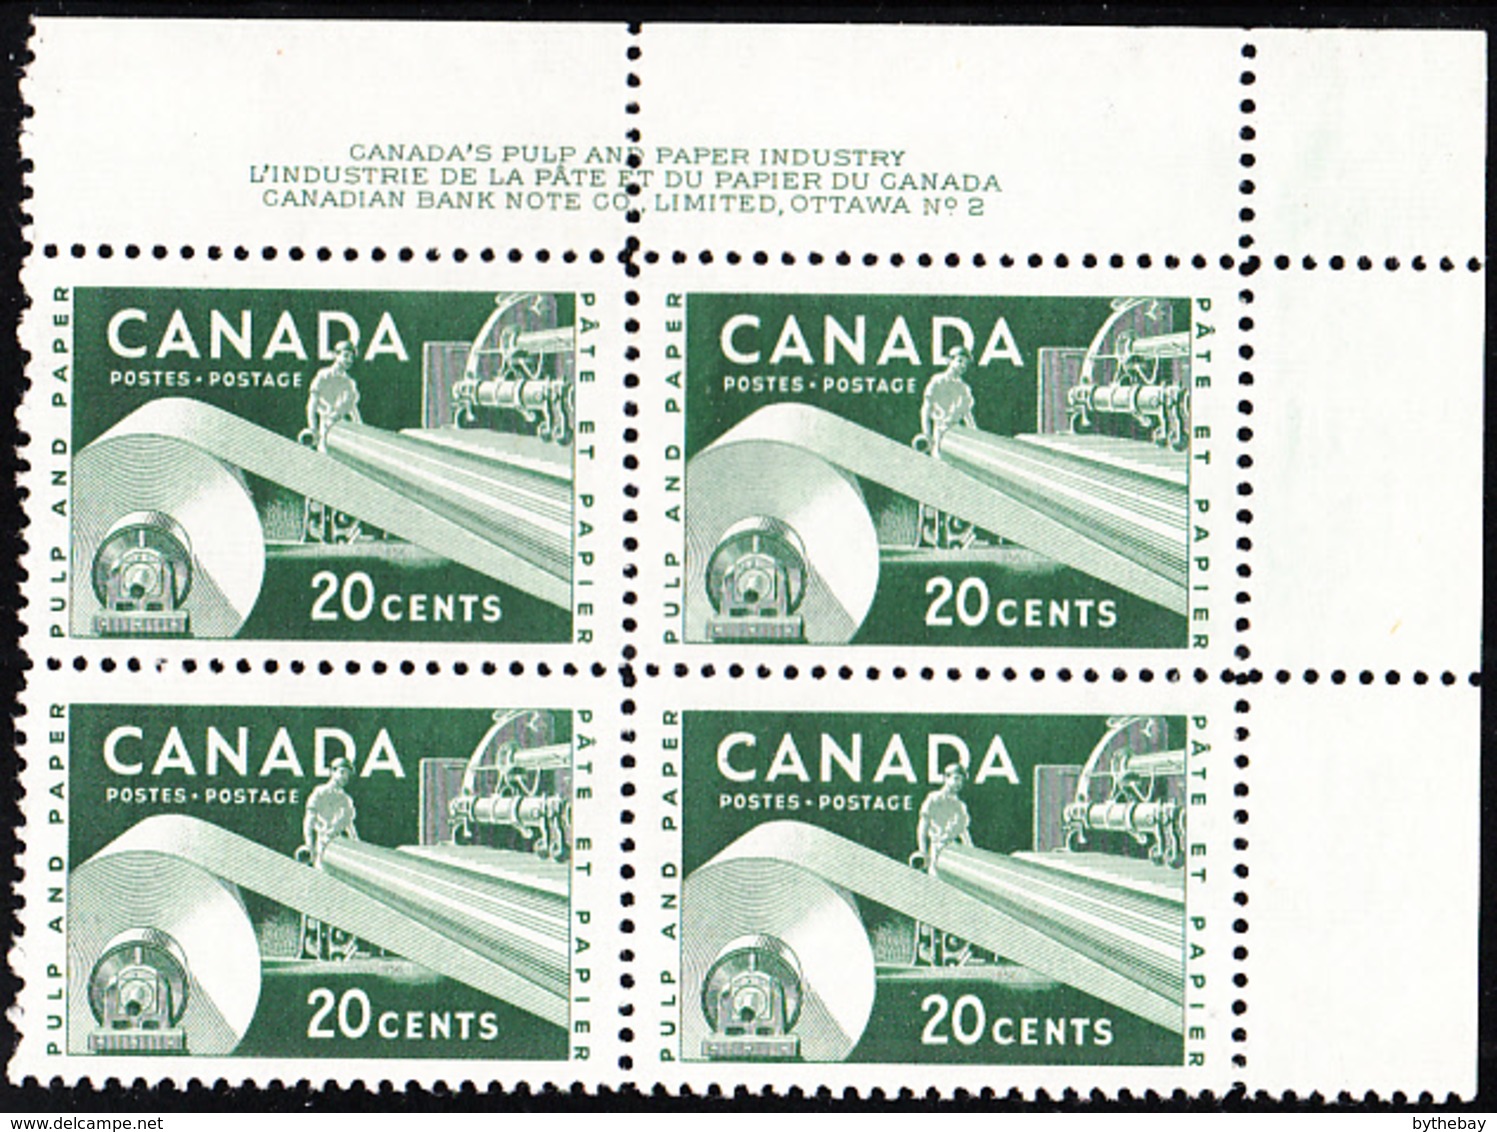 Canada 1956 MNH Sc #362 20c Paper Industry Plate #2 UR - Plate Number & Inscriptions